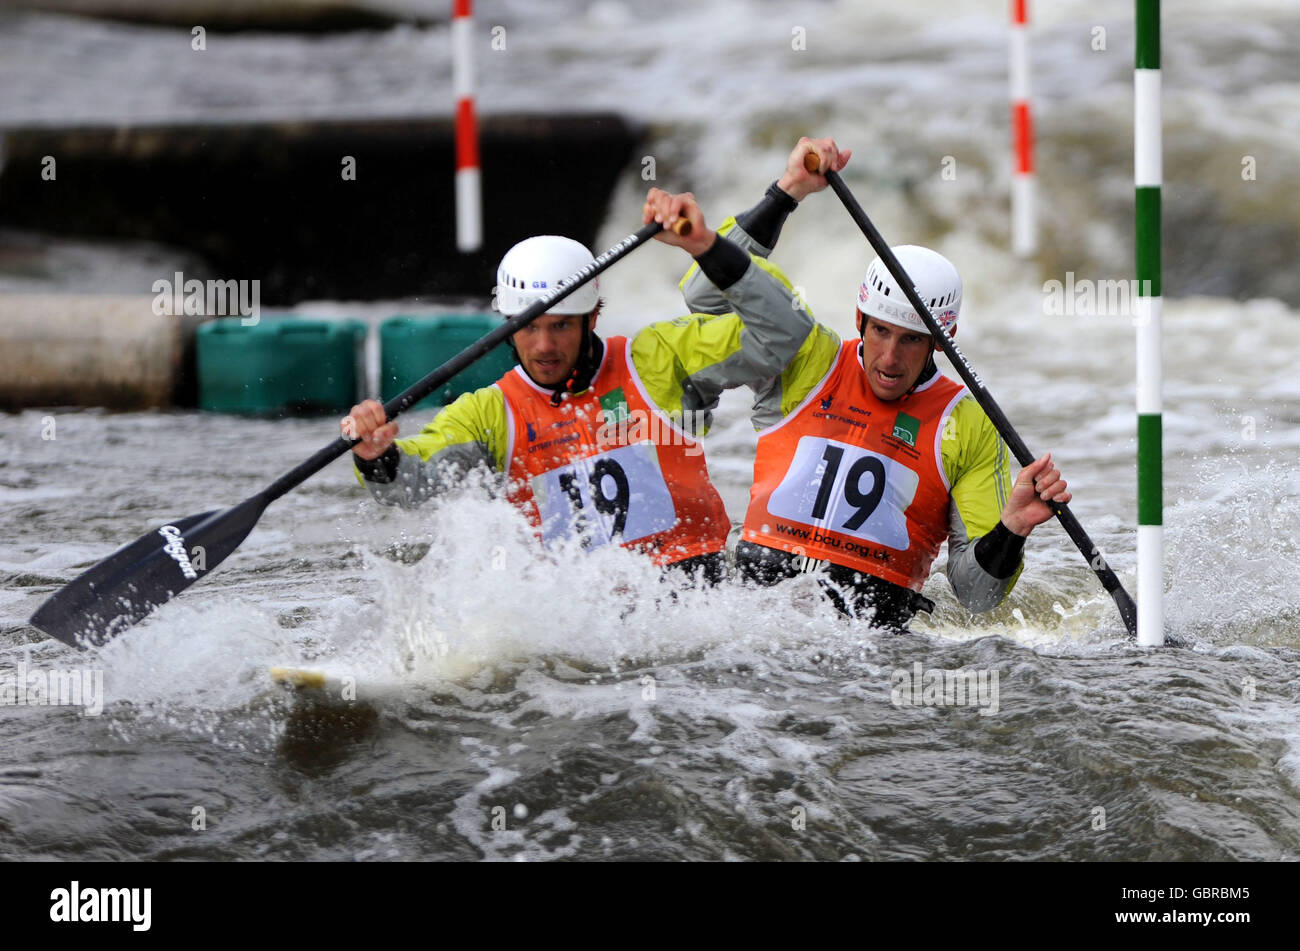 Great Britain's Timothy Baillie and Etienne Stott during the first round of the Men's C2 during the European Slalom Championships at Holme Pierrepont, Nottingham. Stock Photo